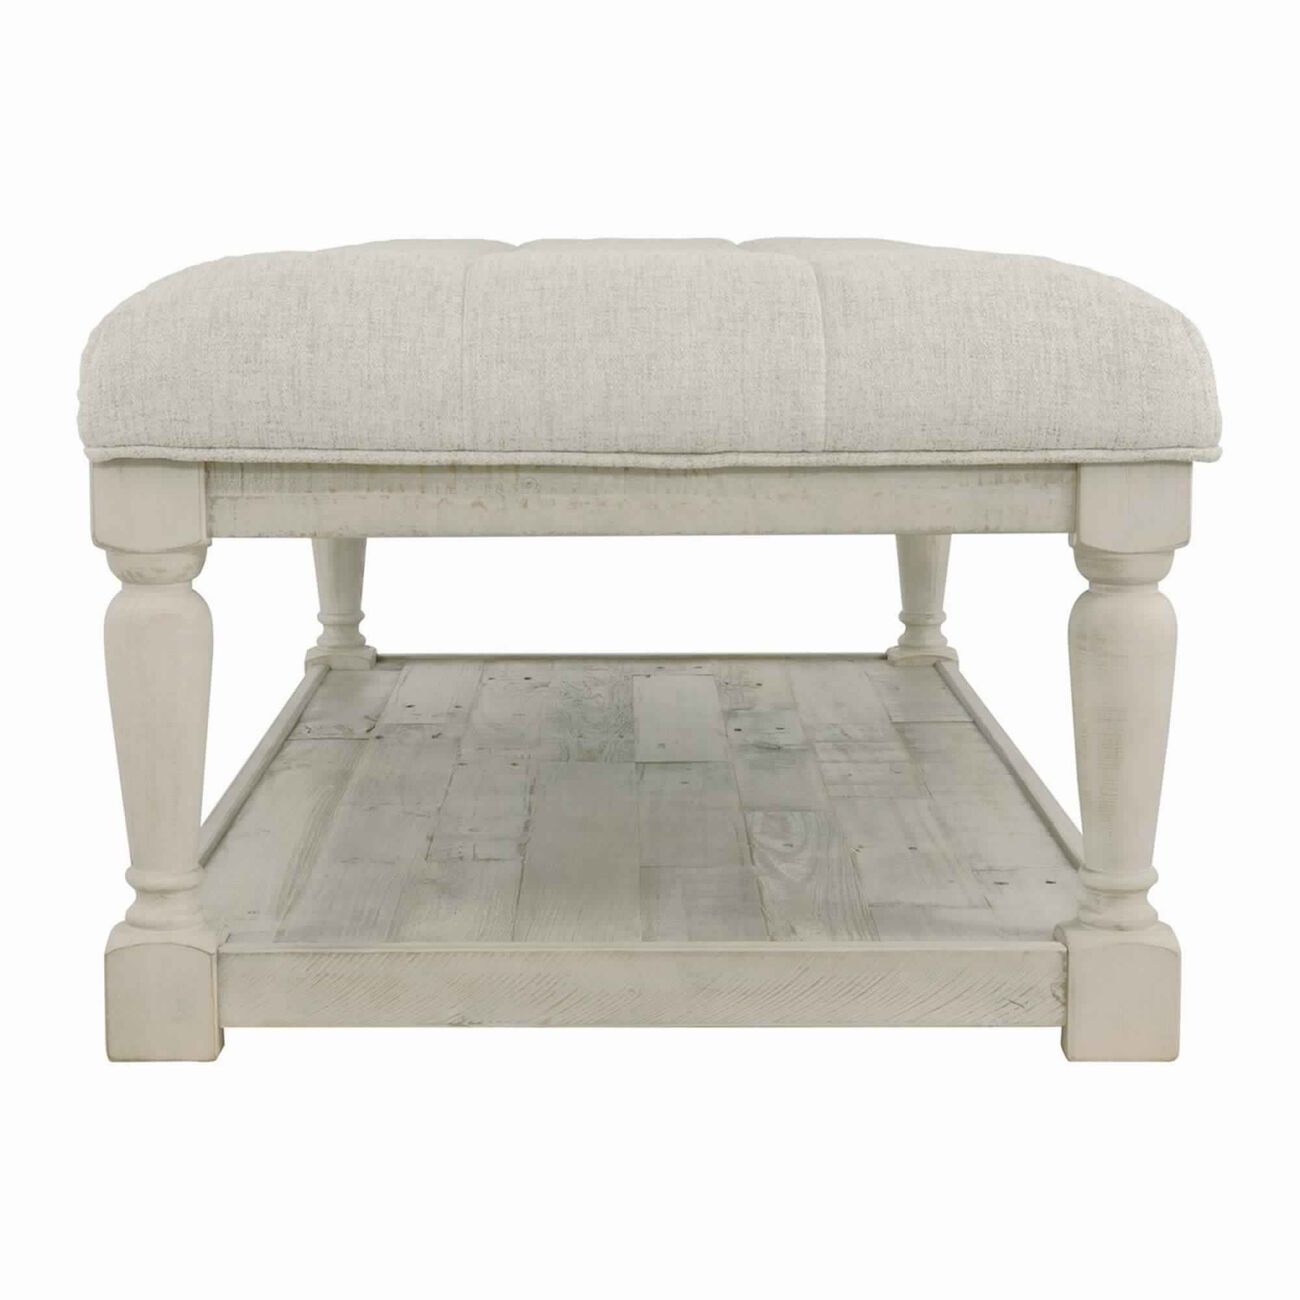 Plank Style Padded Top Rectangular Ottoman Cocktail Table, White